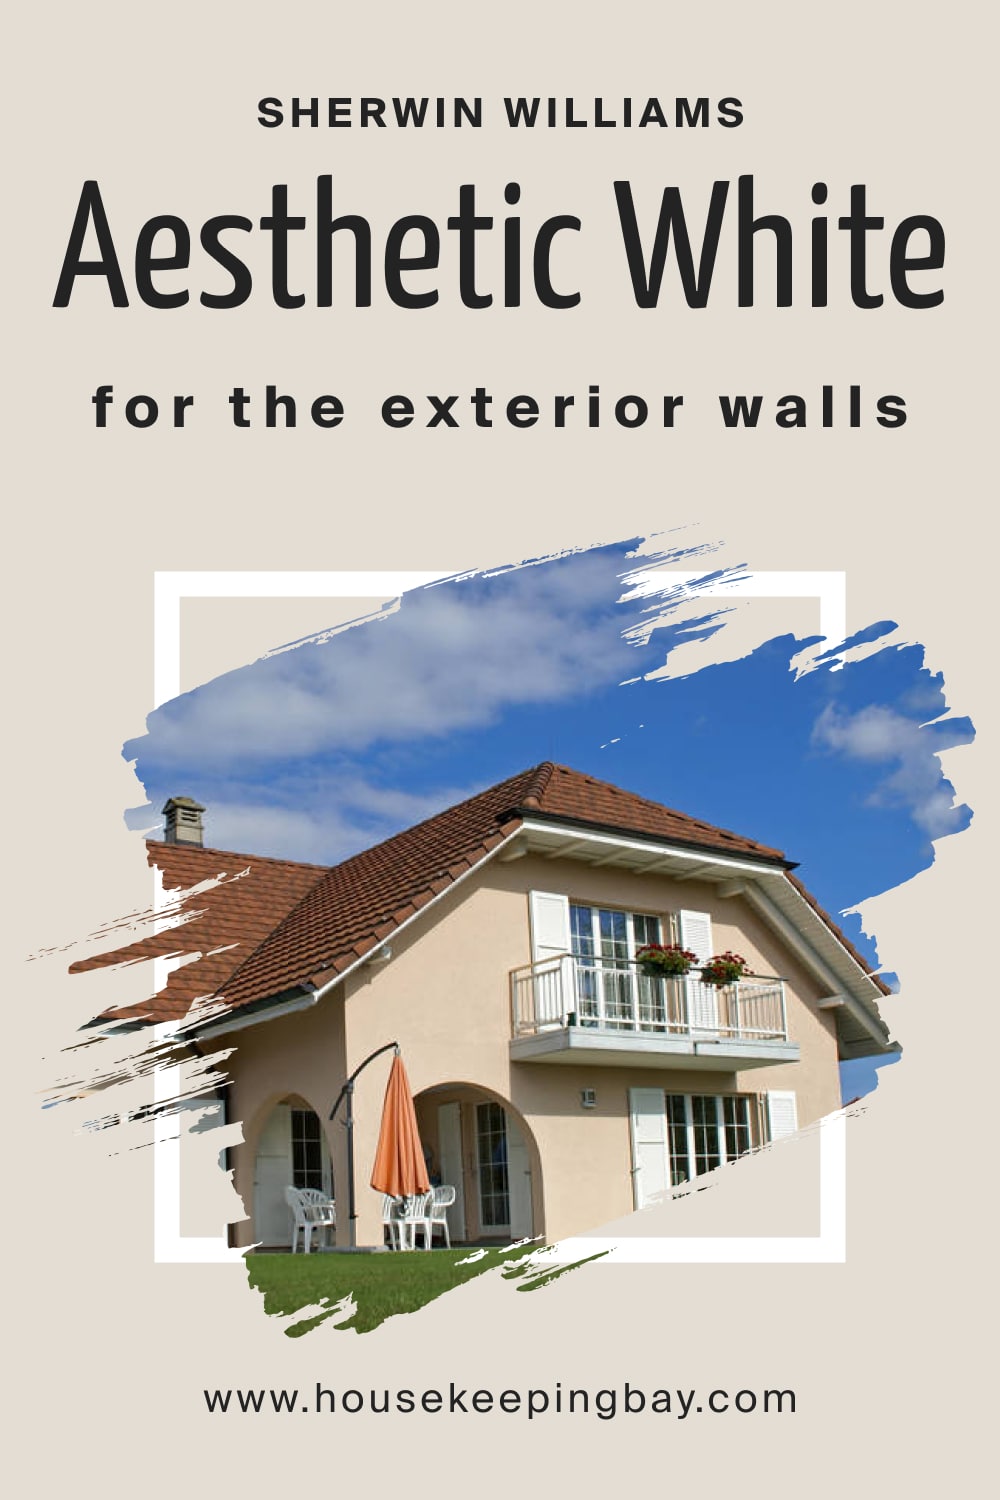 Sherwin Williams. Aesthetic White SW 7035 For the exterior walls